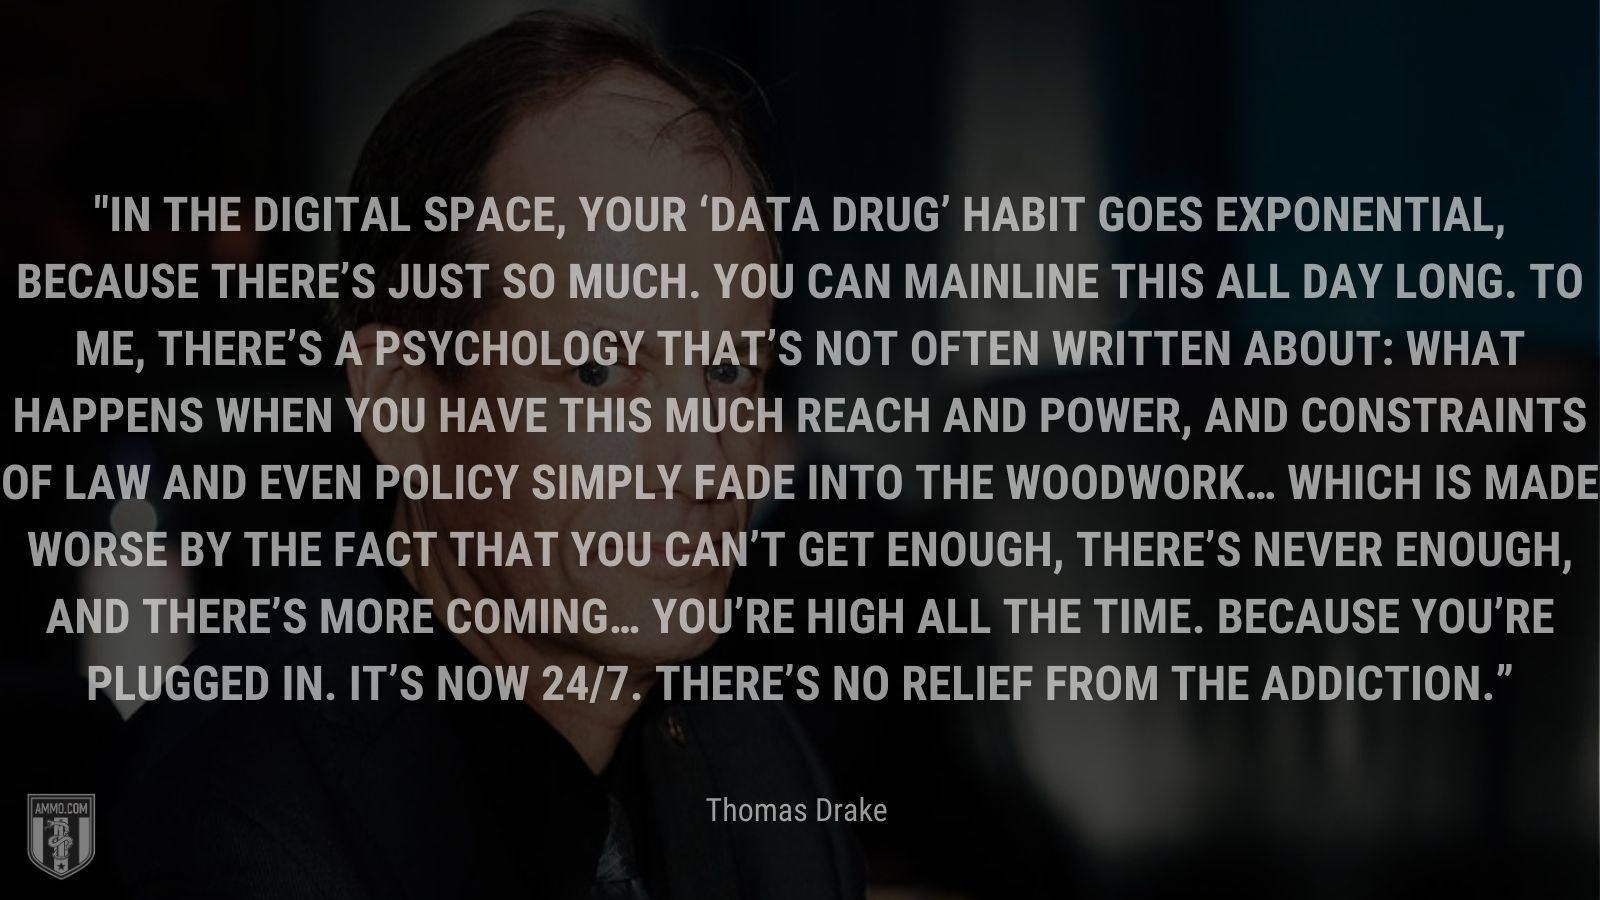 “In the digital space, your ‘data drug’ habit goes exponential, because there’s just so much. You can mainline this all day long. To me, there’s a psychology that’s not often written about: What happens when you have this much reach and power, and constraints of law and even policy simply fade into the woodwork… Which is made worse by the fact that you can’t get enough, there’s never enough, and there’s more coming… You’re high all the time. Because you’re plugged in. It’s now 24/7. There’s no relief from the addiction.” - Thomas Drake